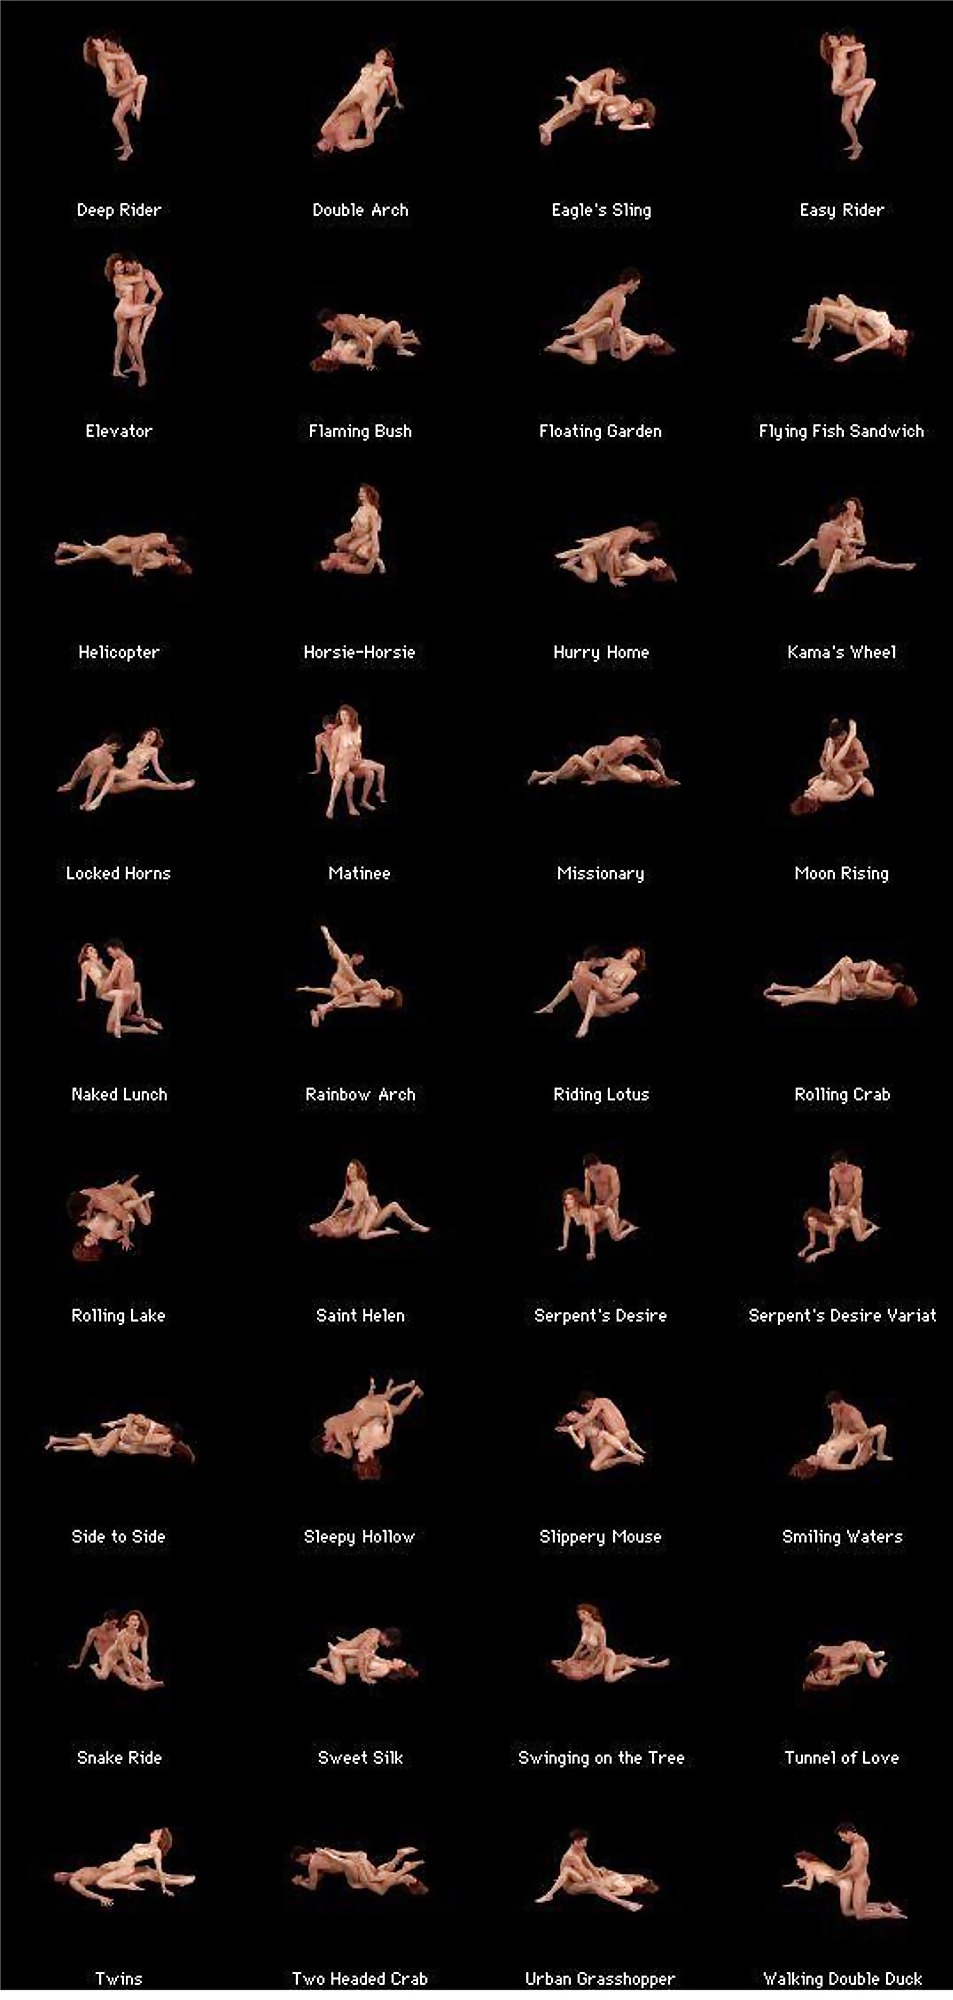 What is your favourite sex position?